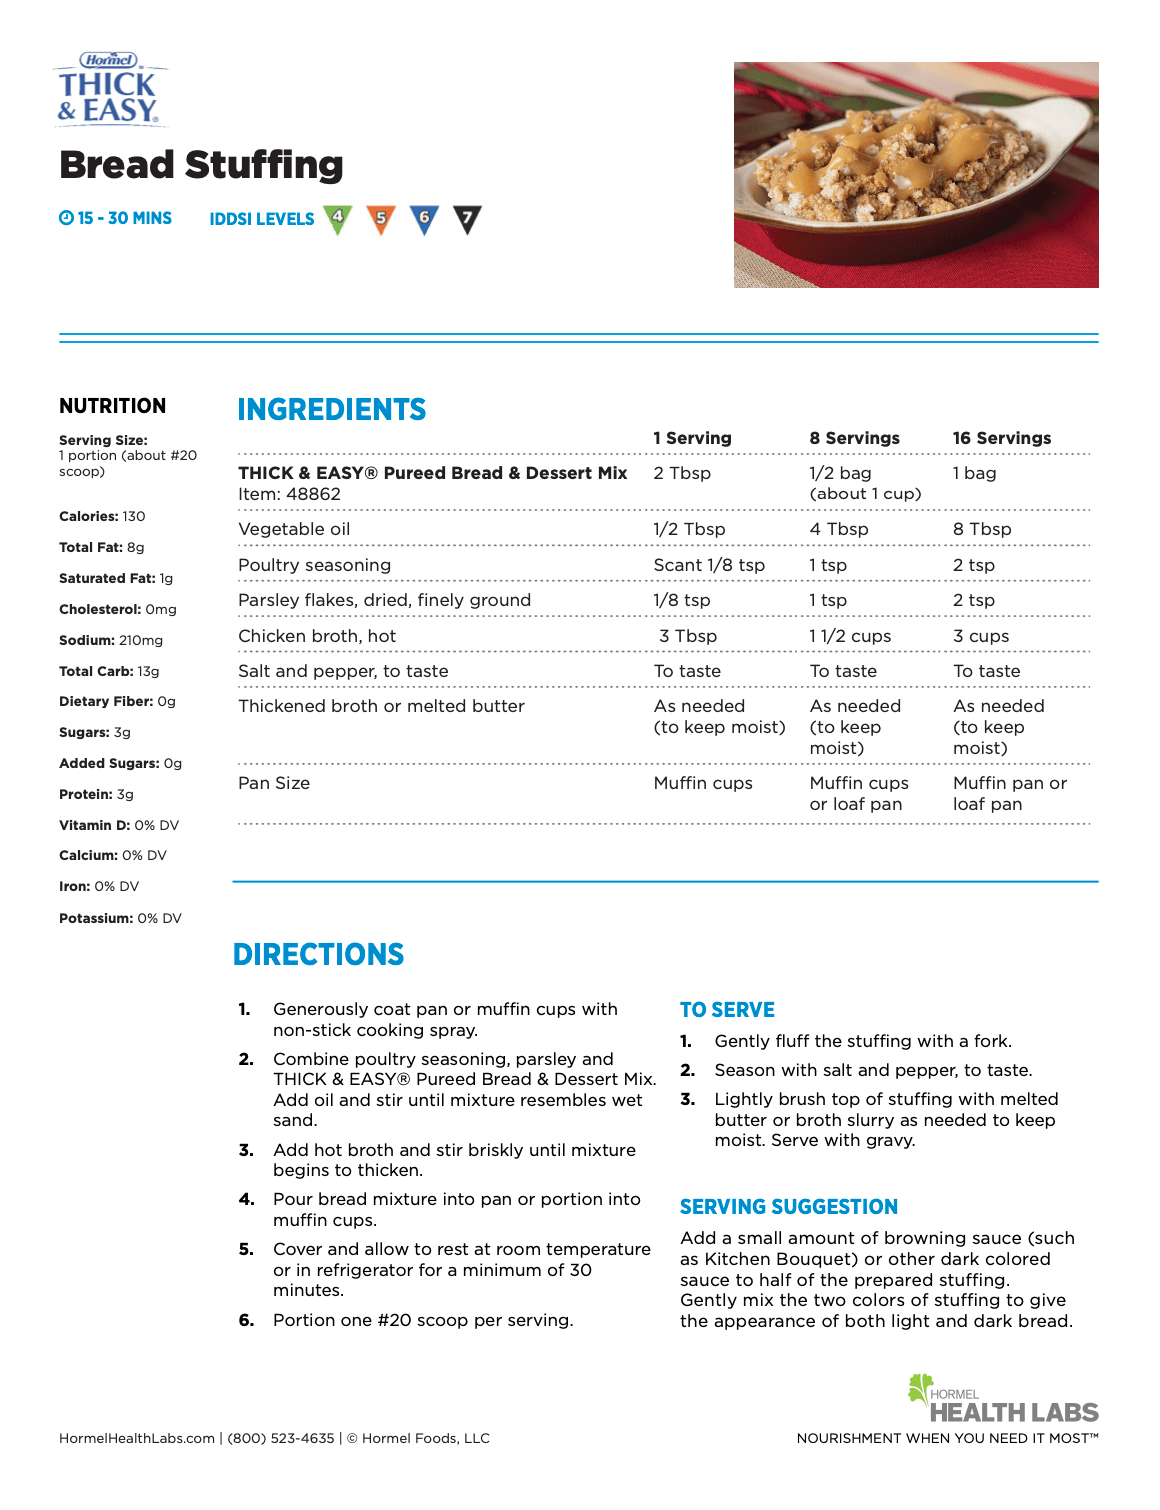 Thick and Easy bread stuffing recipe page